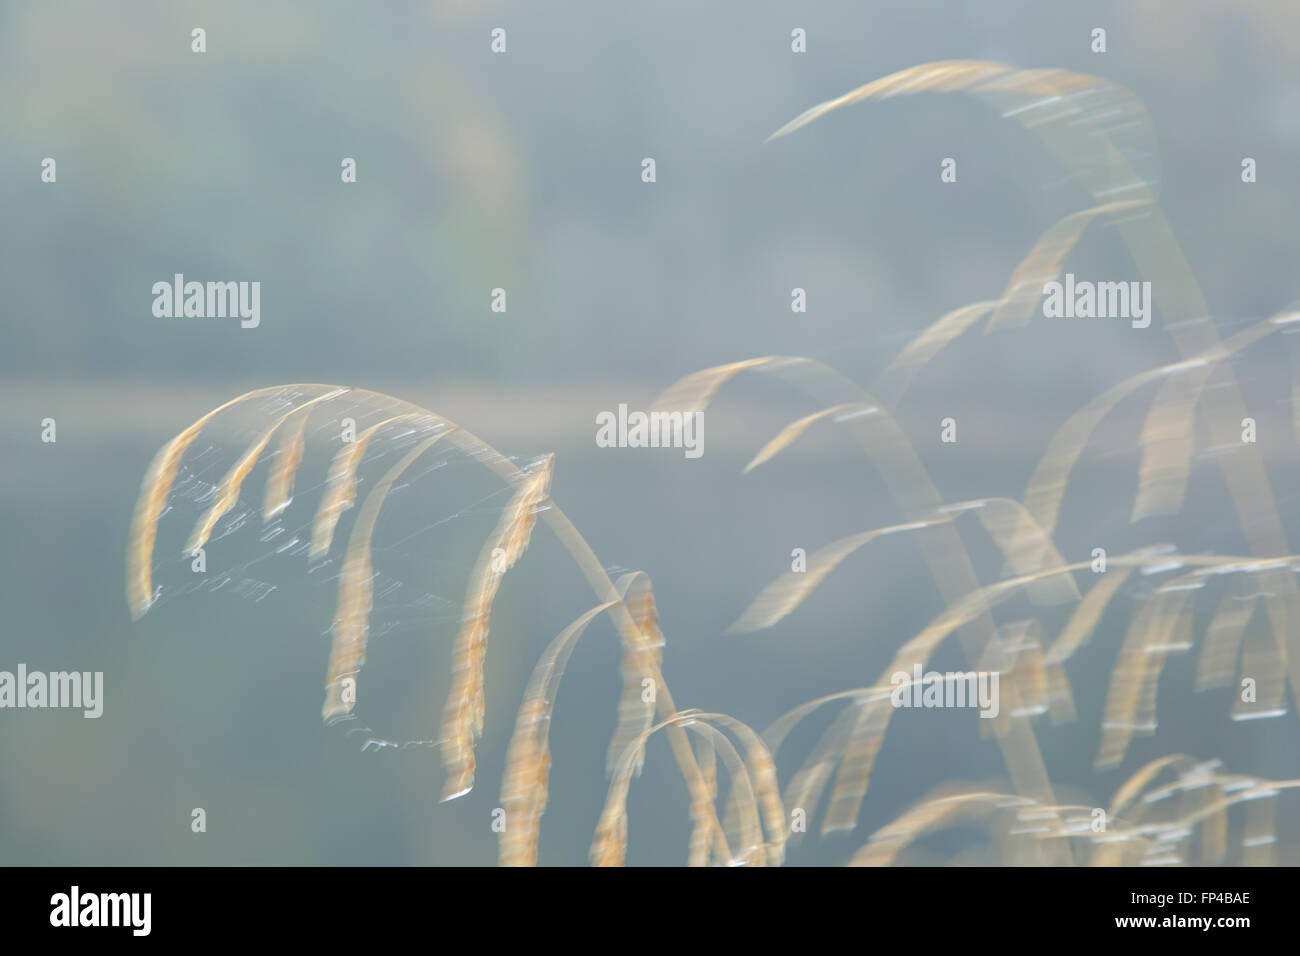 Dew covered grasses moving Stock Photo